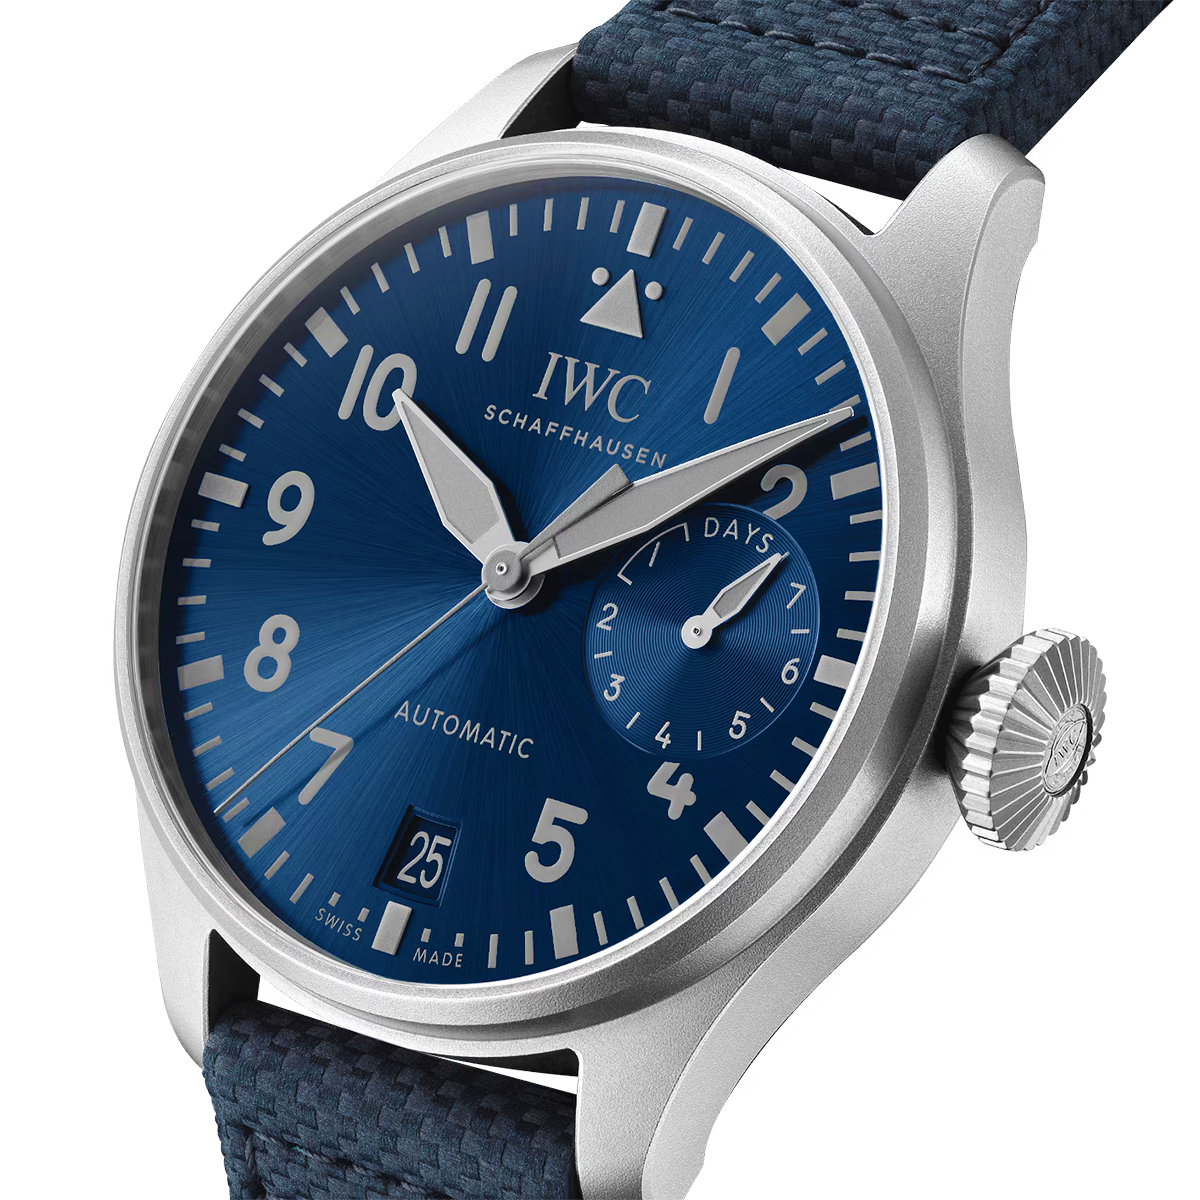 Big Pilot's IWC Racing Works Edition 46mm Blue Dial Watch